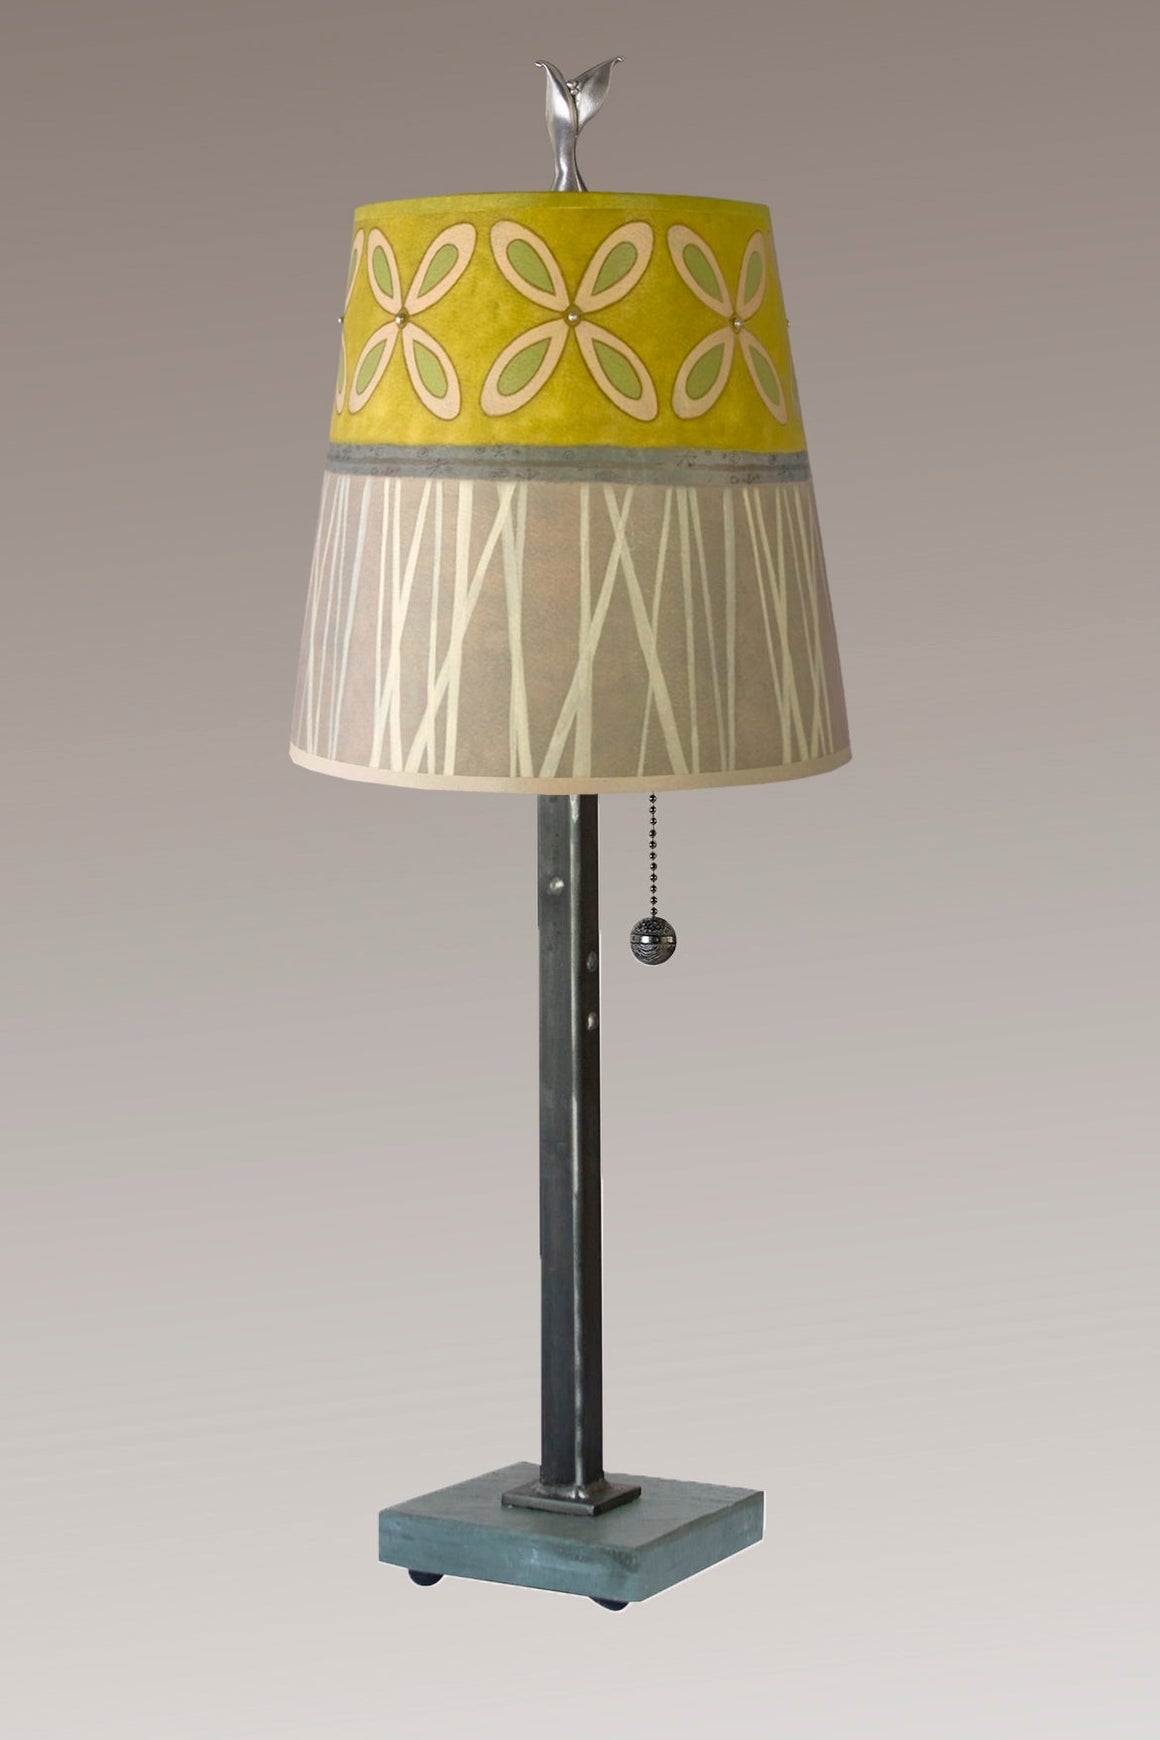 Steel Table Lamp with Small Drum Shade in Kiwi